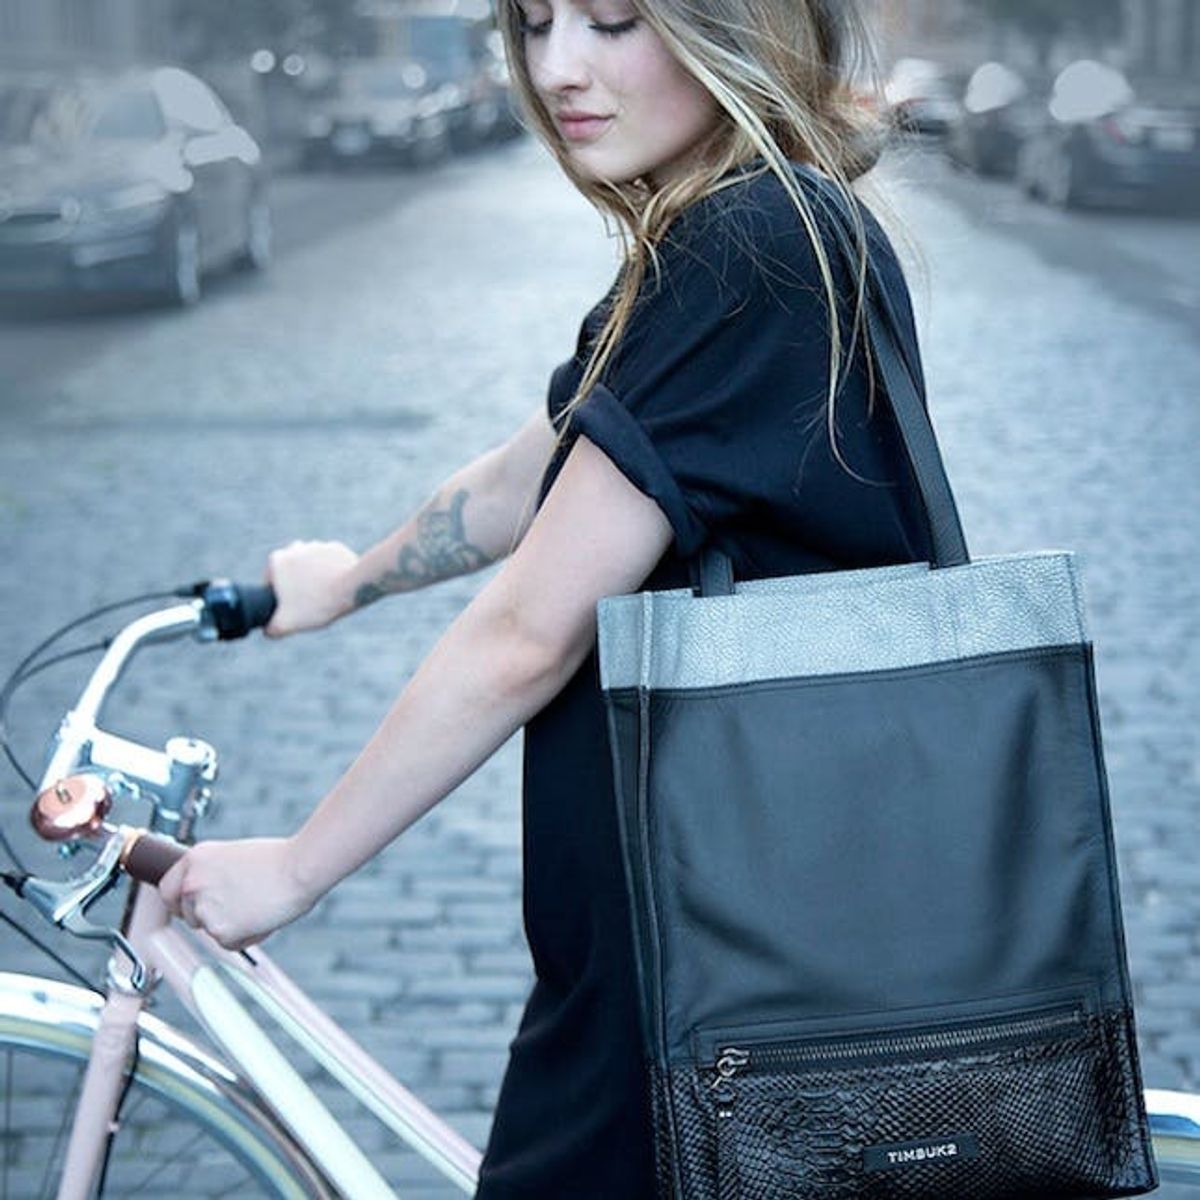 You’ll Want These New Bike Bags Even If You Don’t Bike - Brit + Co